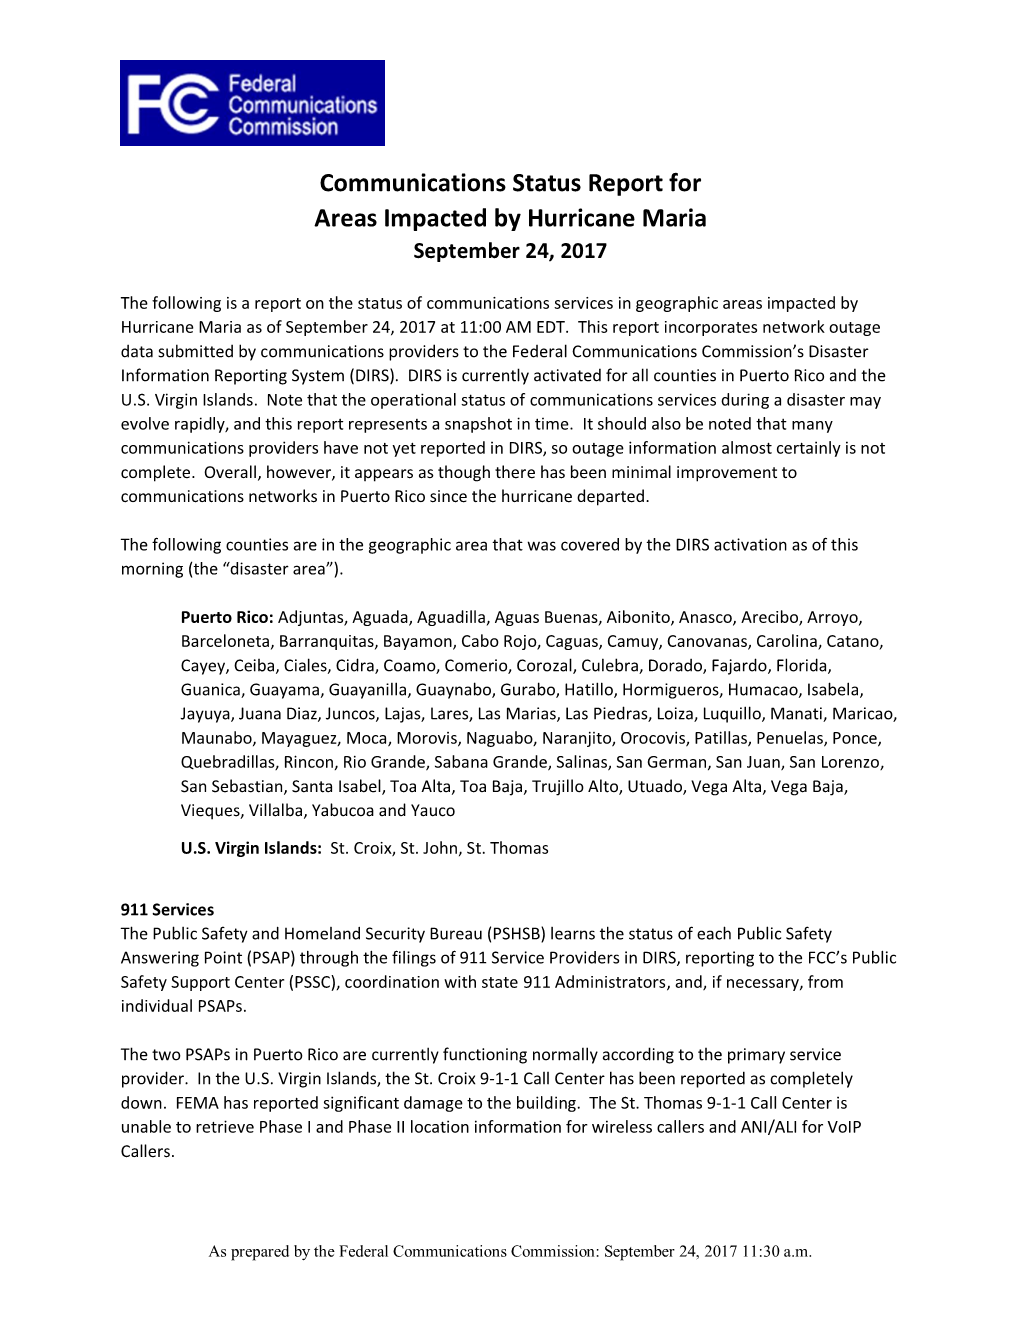 Communications Status Report for Areas Impacted by Hurricane Maria September 24, 2017